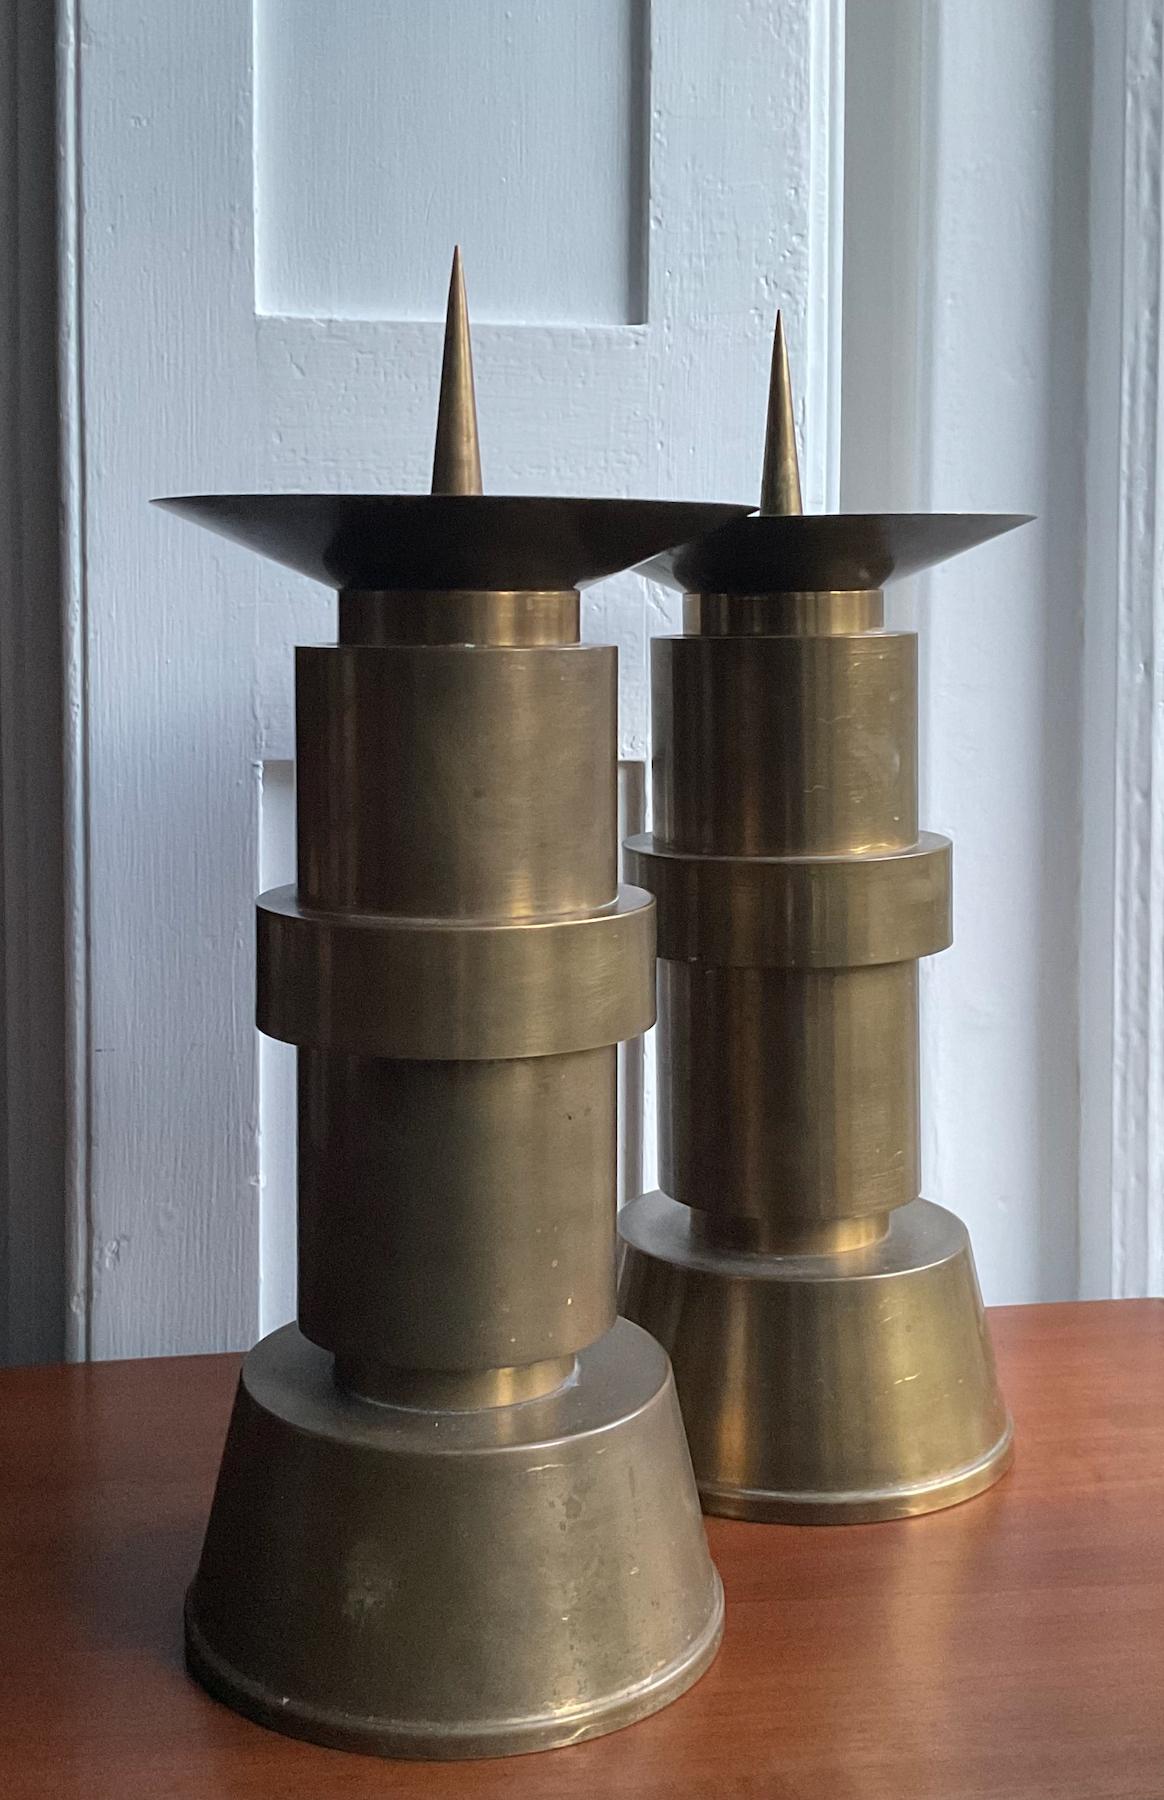 *** Spring Sale Price ***

Pair of substantial brass candleholders, possibly former church pieces. Mid-20th century in machine-age style. Found in Germany.

The pieces are in good vintage condition with a nice mellow patina. There are age